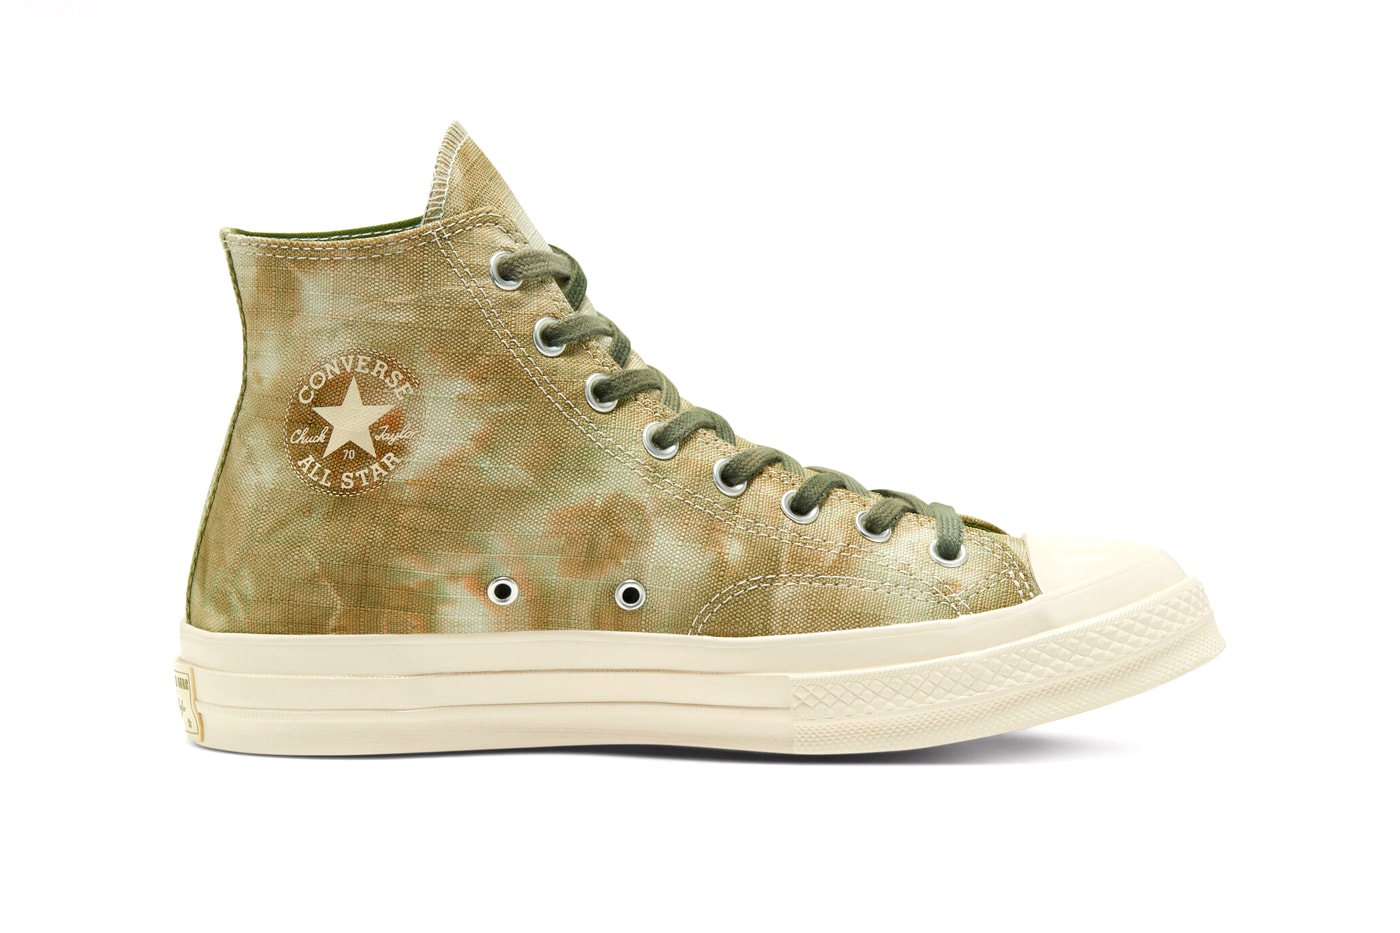 Converse Twisted Vacation Chuck 70 Street Sage Court Blue Venetian Rust Release 167651C 167648C washed tie dye green brown blue orange red